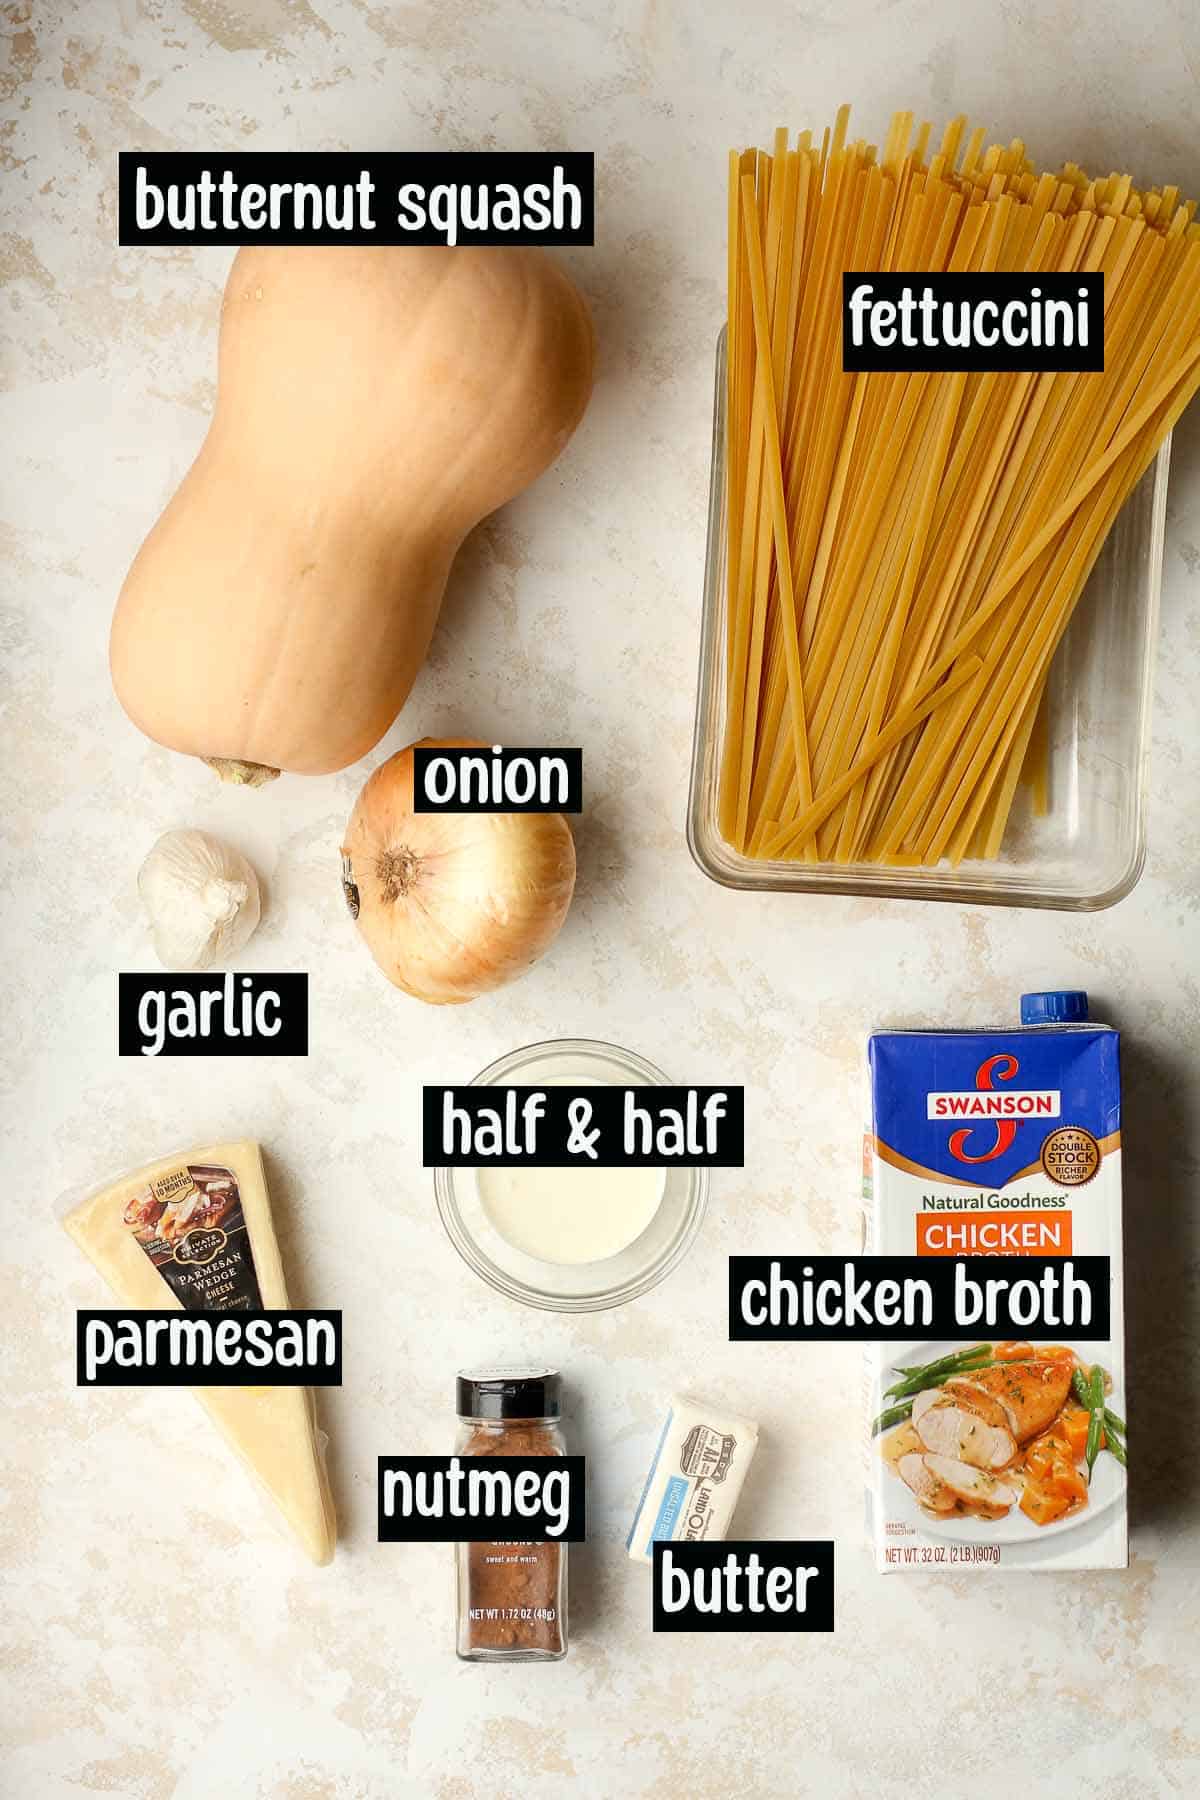 Ingredients for the roasted butternut squash pasta.